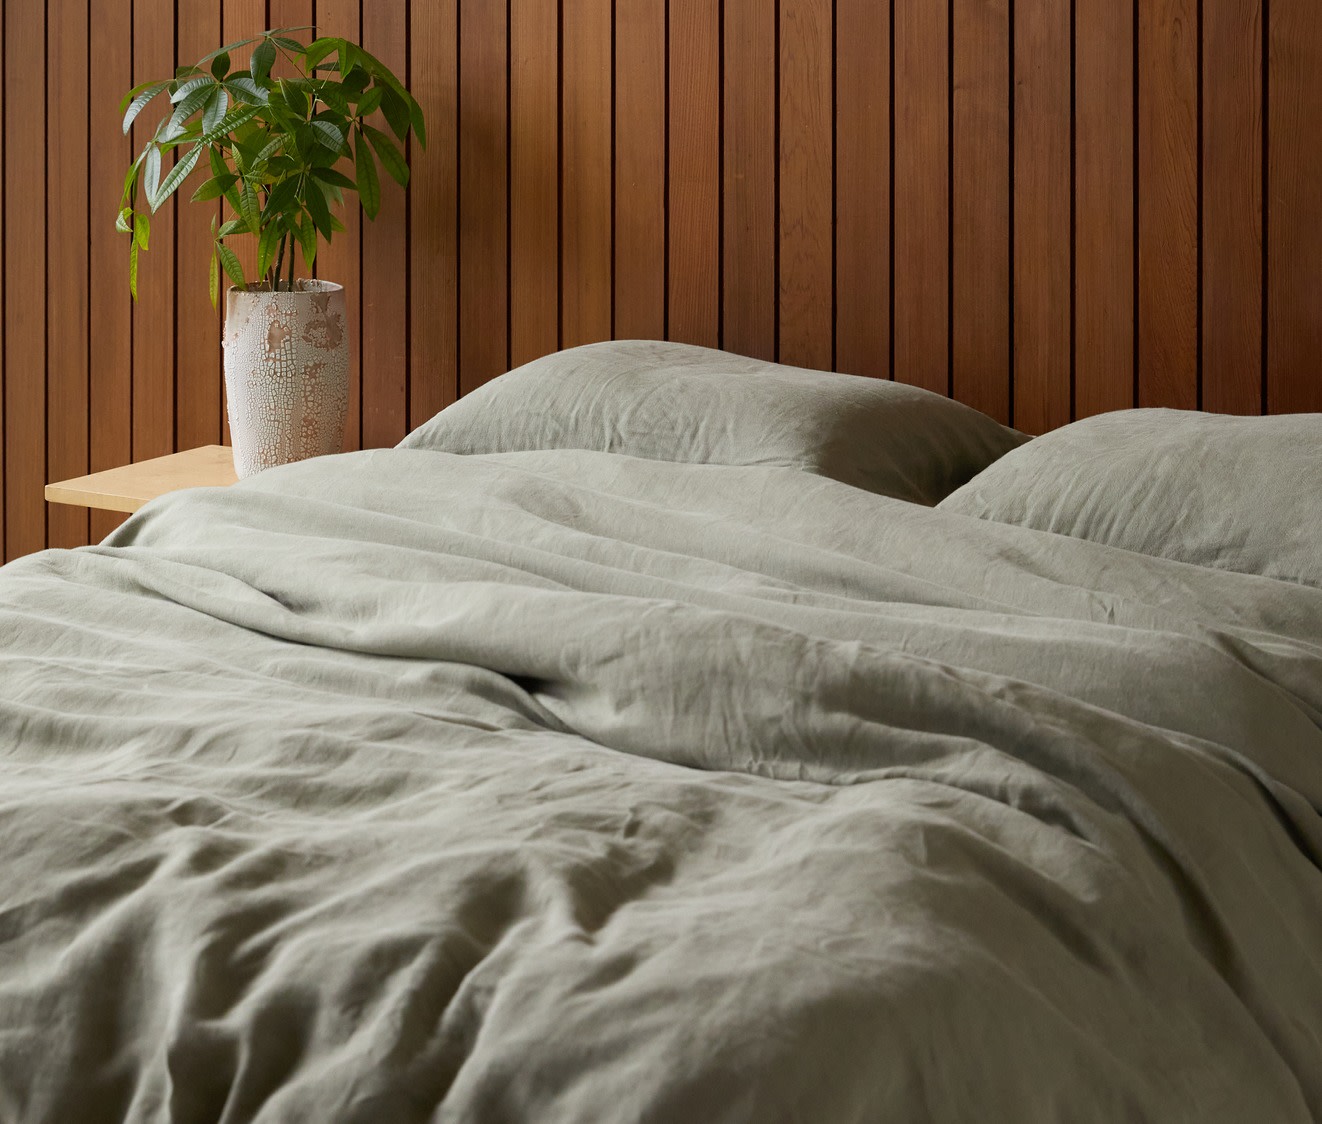 A simple bed with moss green linen sheets